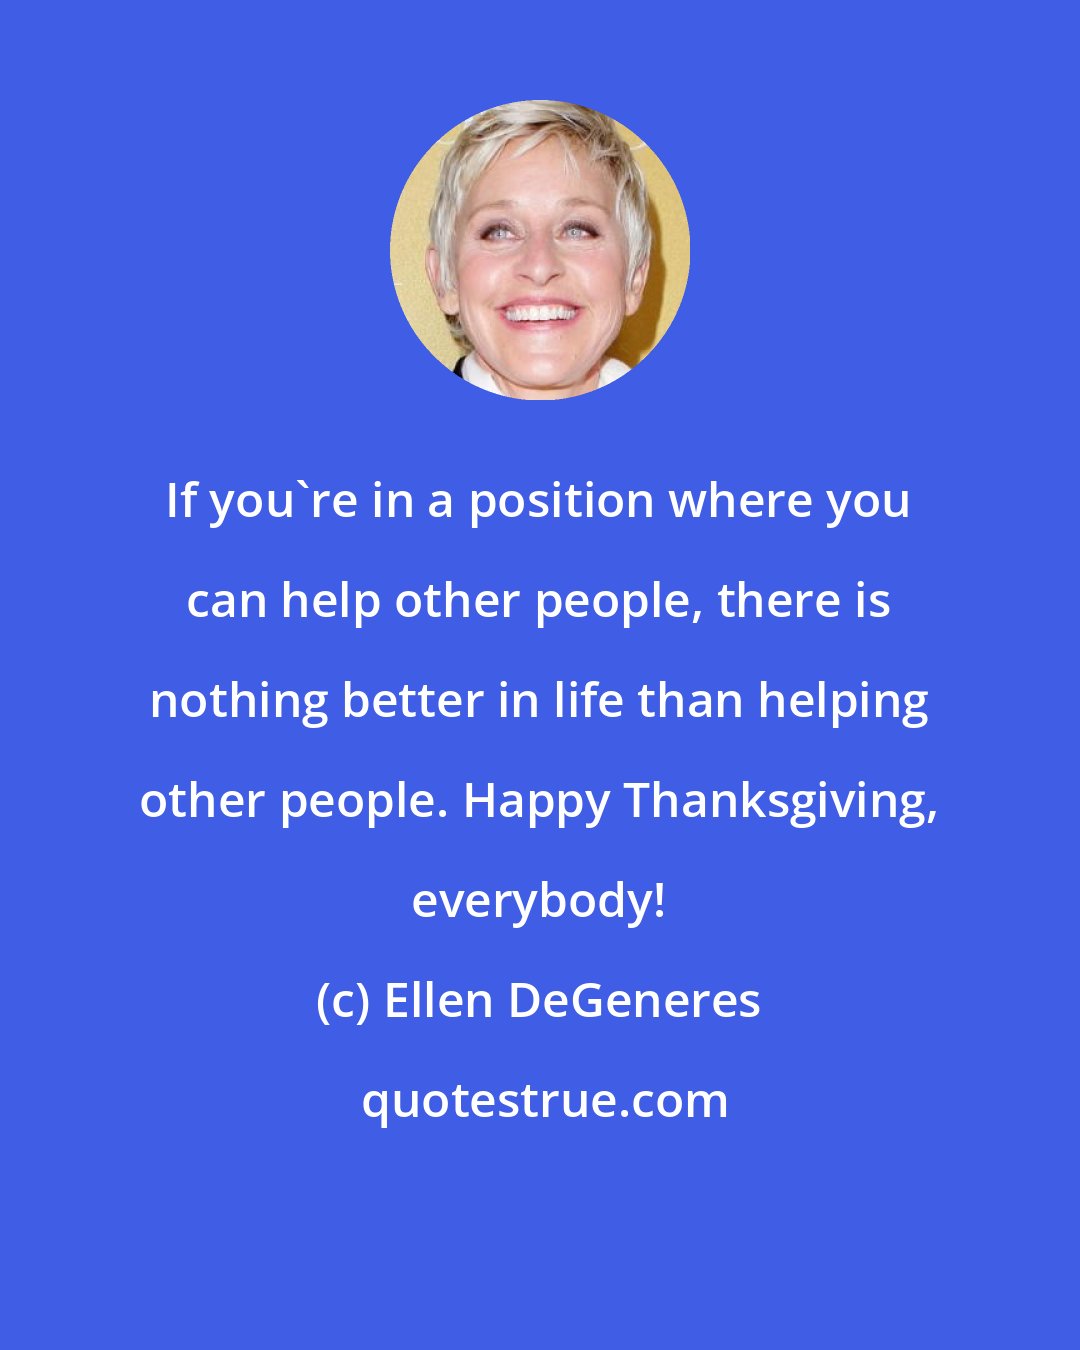 Ellen DeGeneres: If you're in a position where you can help other people, there is nothing better in life than helping other people. Happy Thanksgiving, everybody!